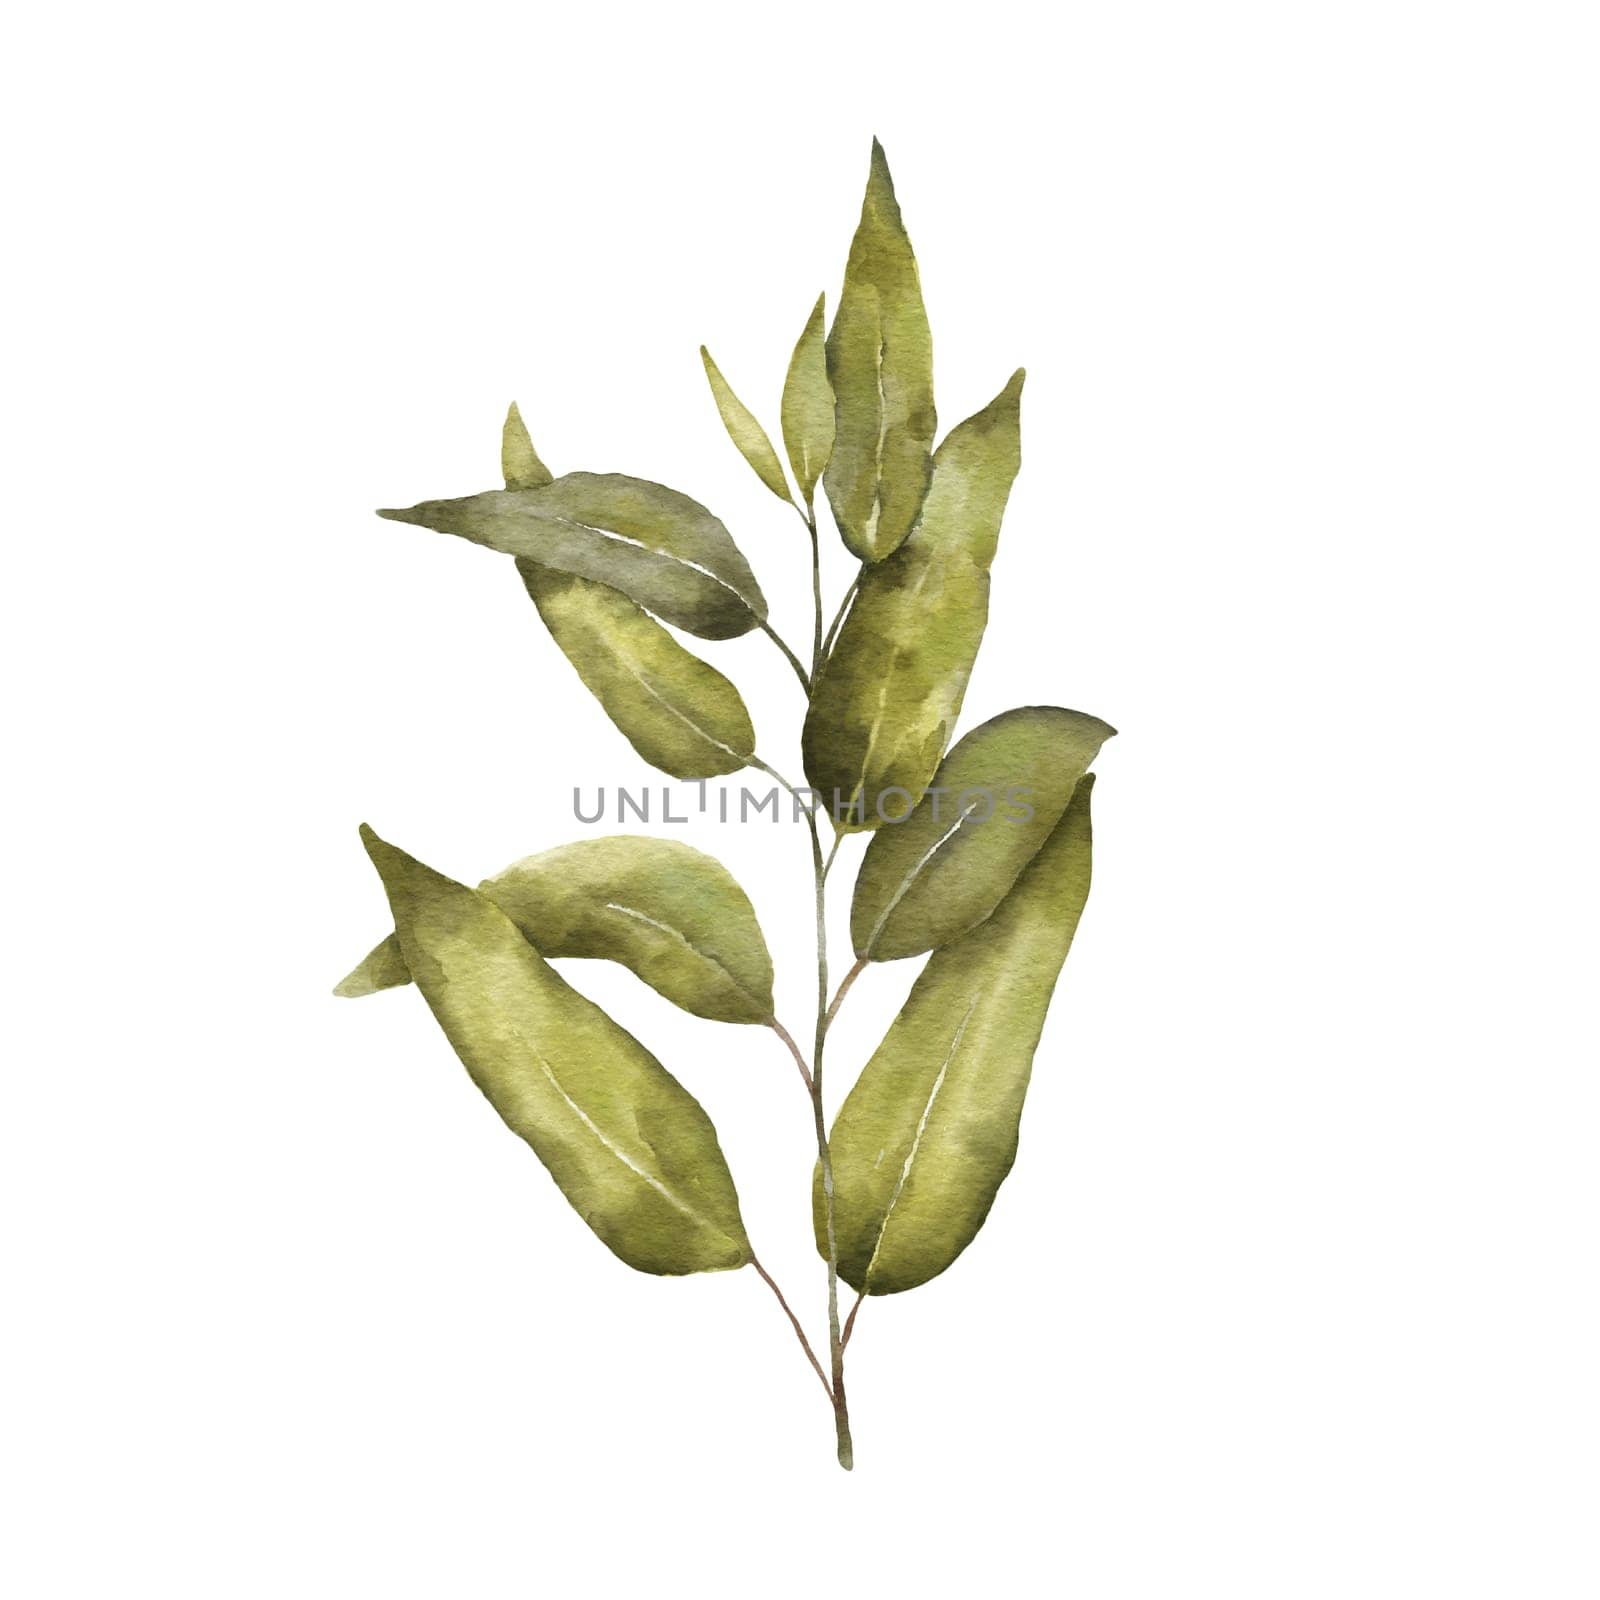 Watercolor Eucaliptus branch drawing. Hand drawn illustration with eucalyptus leaves isolated on white background. Floral herbal image of green plant.